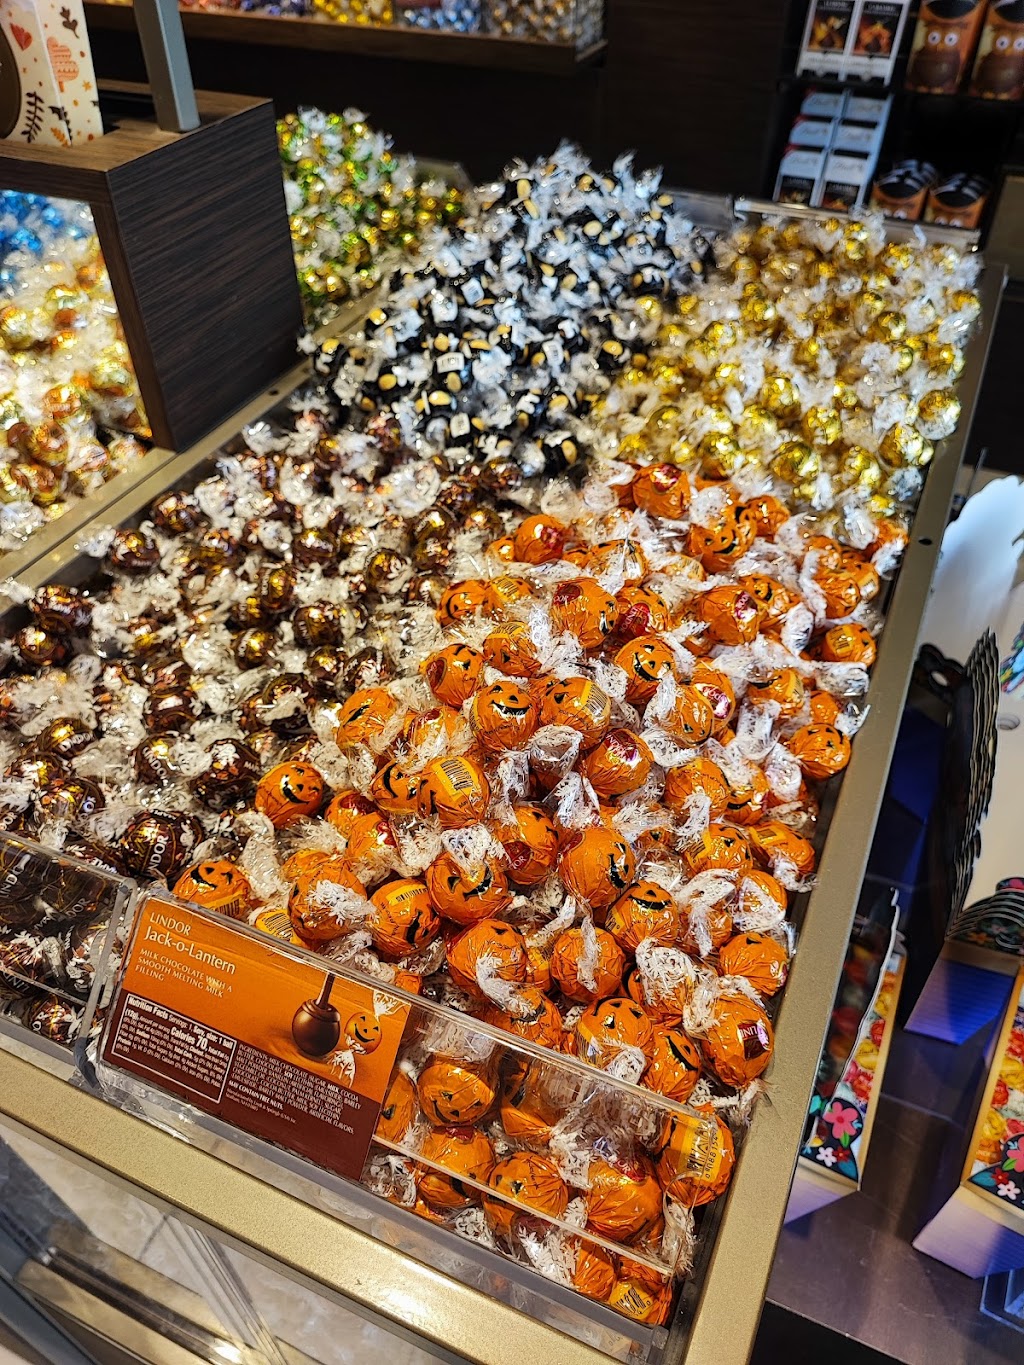 Lindt Chocolate Shop | Hamptons District, 498 Red Apple Ct Suite 441B, Central Valley, NY 10917 | Phone: (845) 928-2123